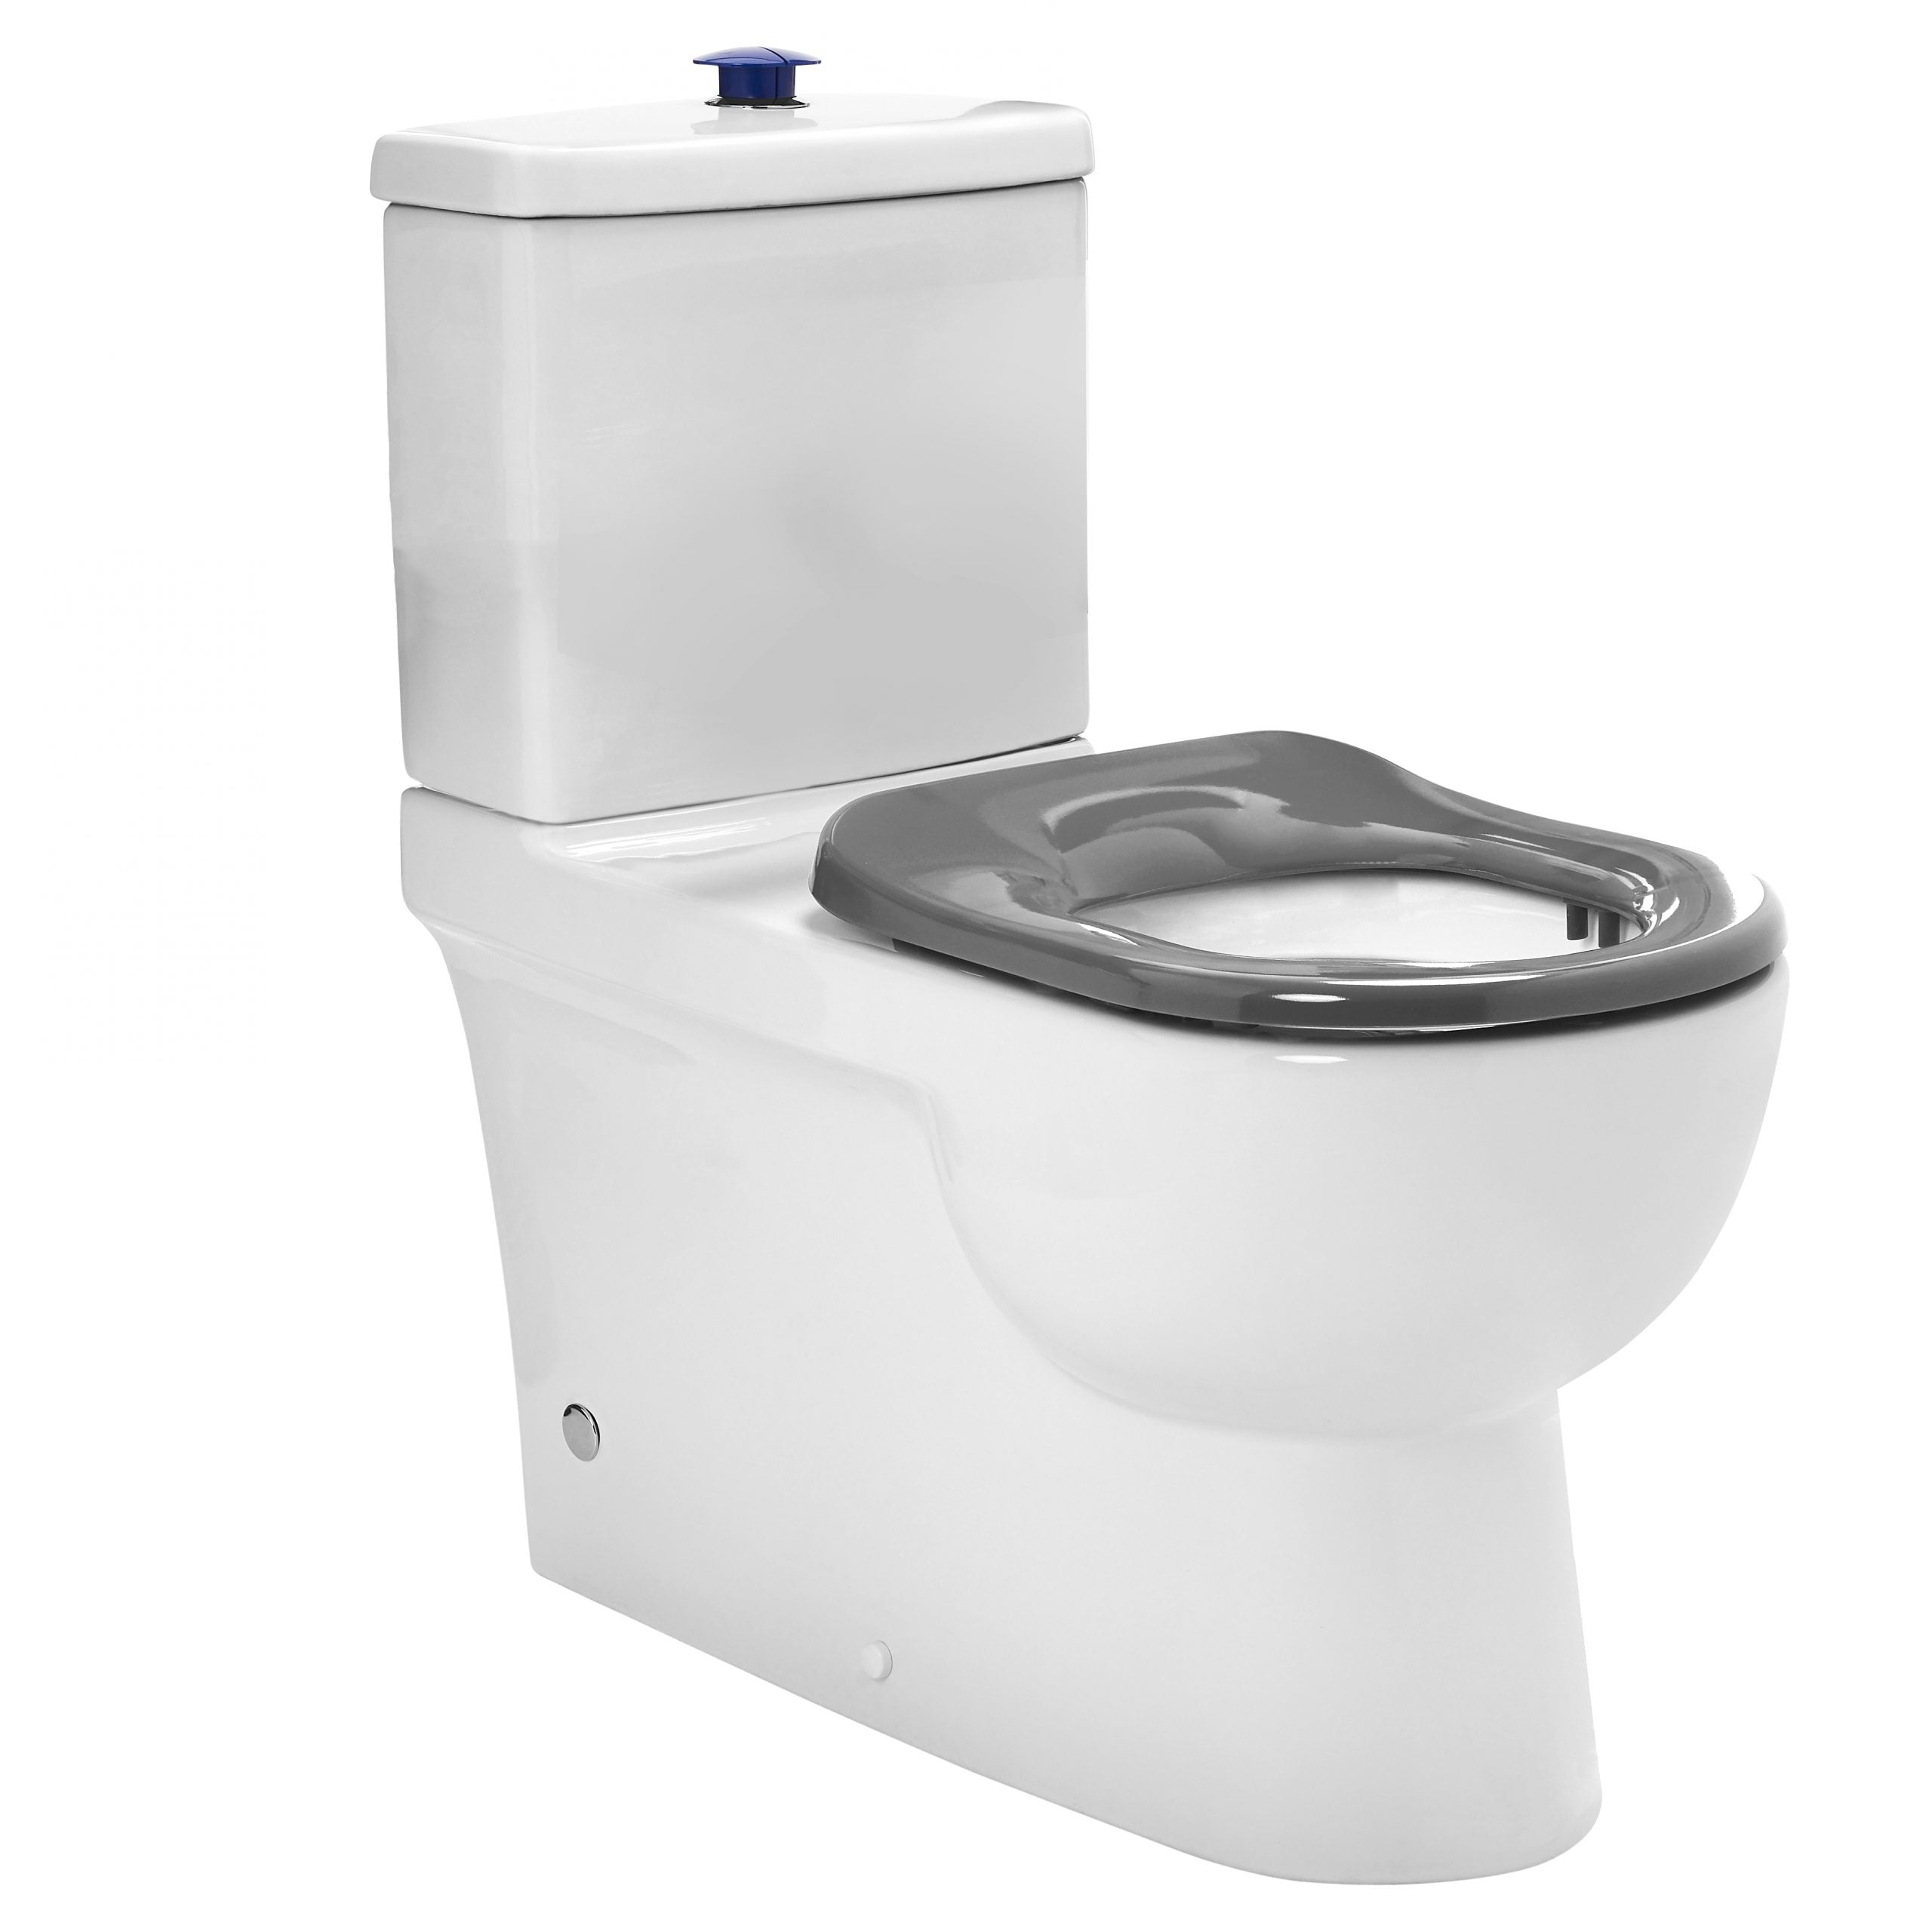 JOHNSON SUISSE LIFE ASSIST FTW SPECIAL NEEDS TOILETS GLOSS WHITE